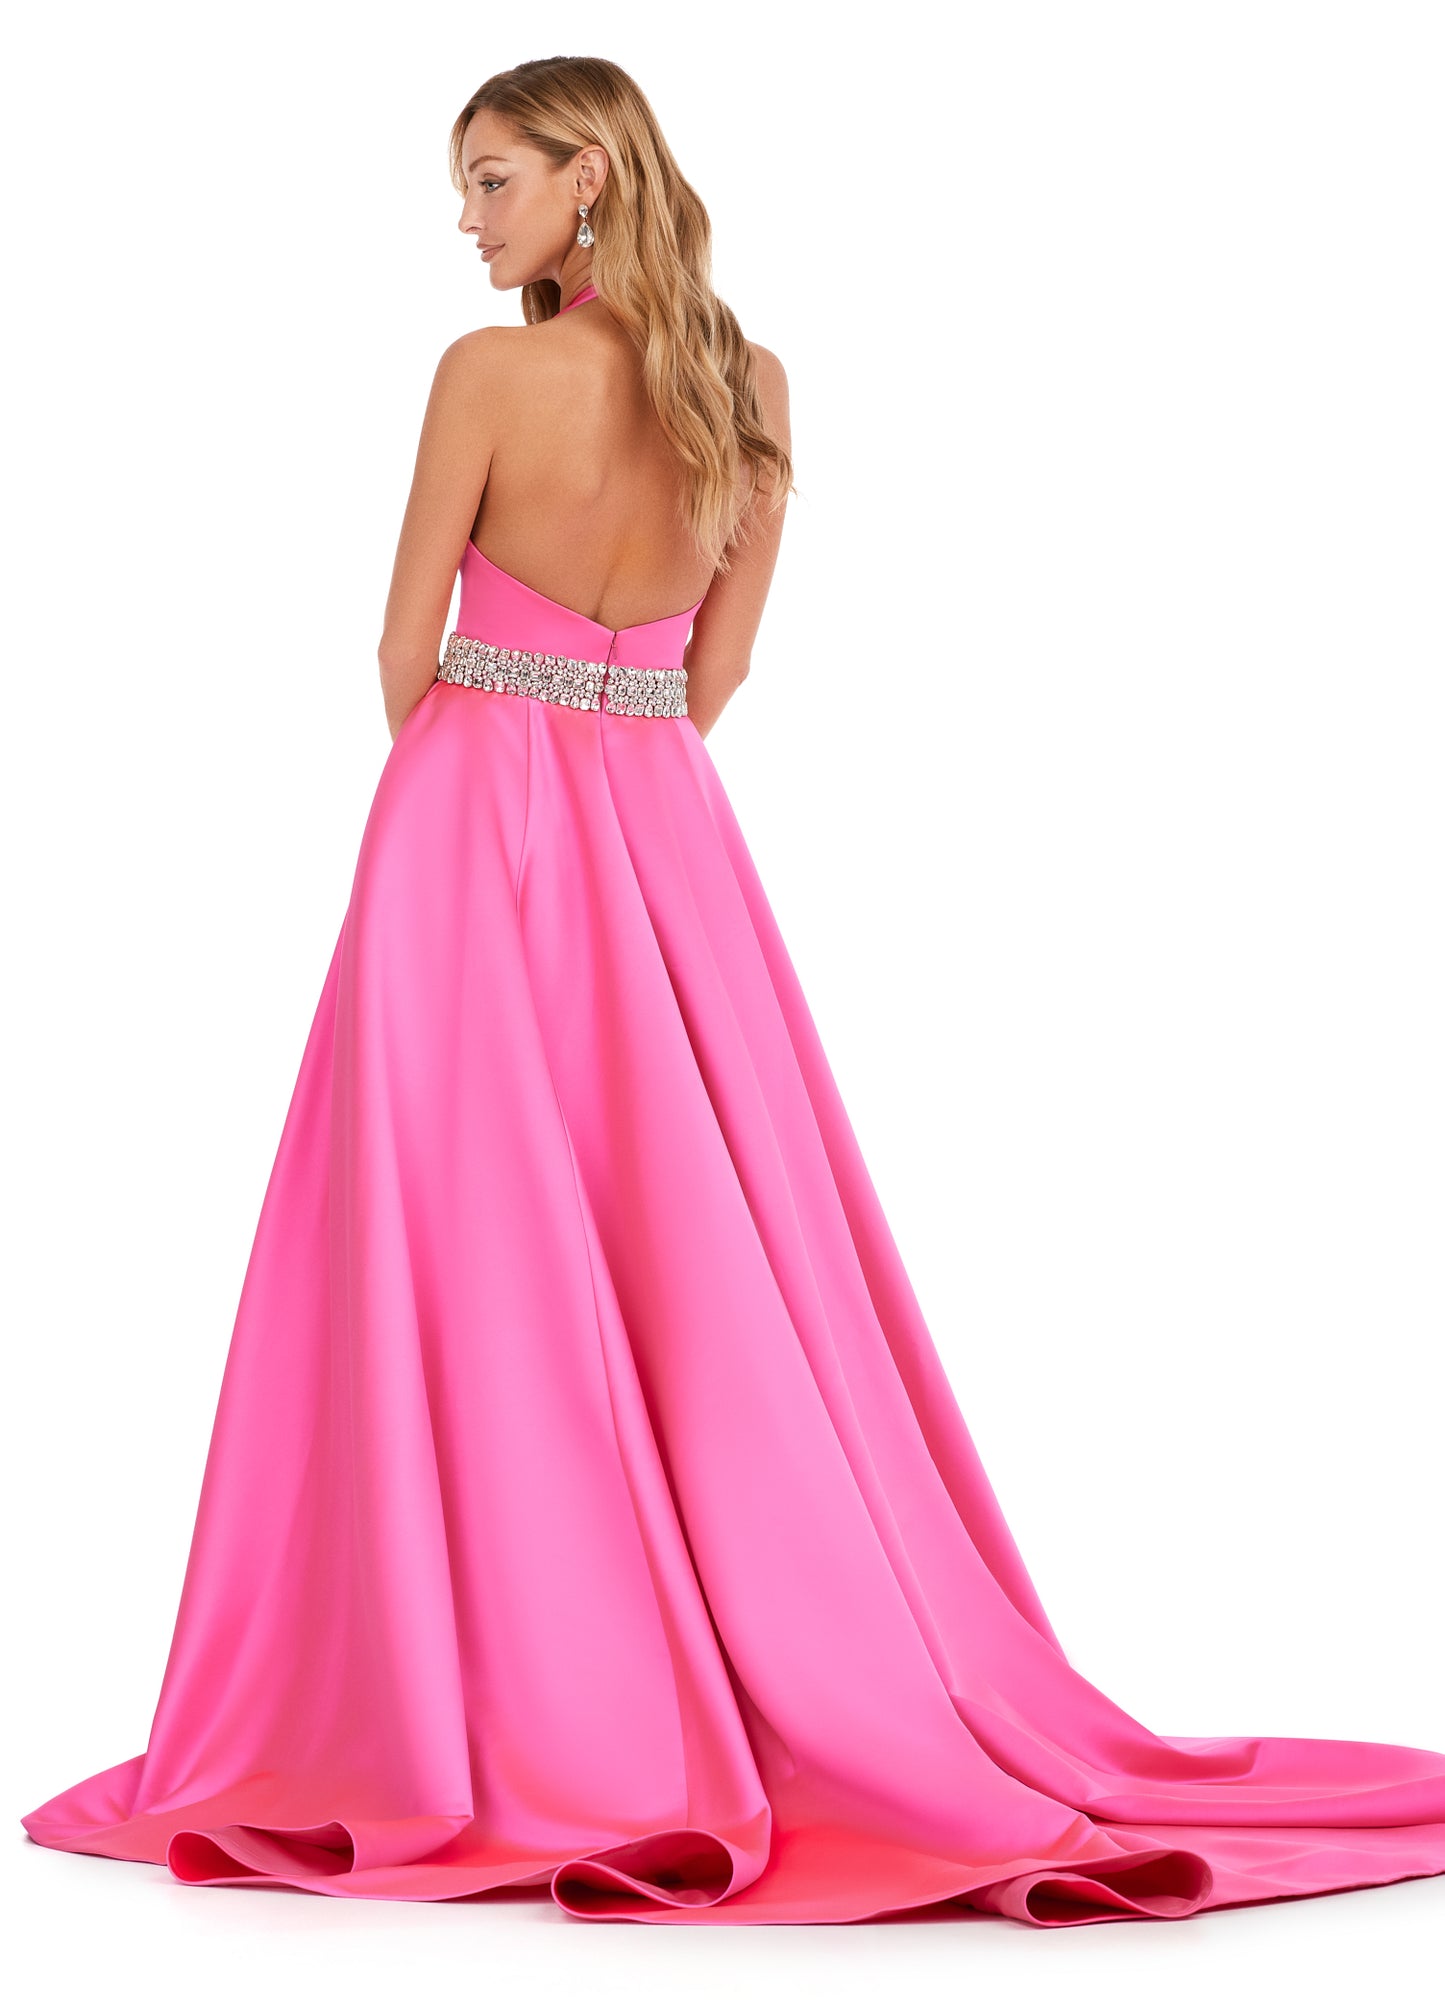 Ashley Lauren 11249 V-Neck Heavy Satin Ballgown Halter Top Open Back Crystal Belt Formal Gown. Make a statement in this beautiful long satin dress, featuring a halter neckline and crystal beaded accent belt.